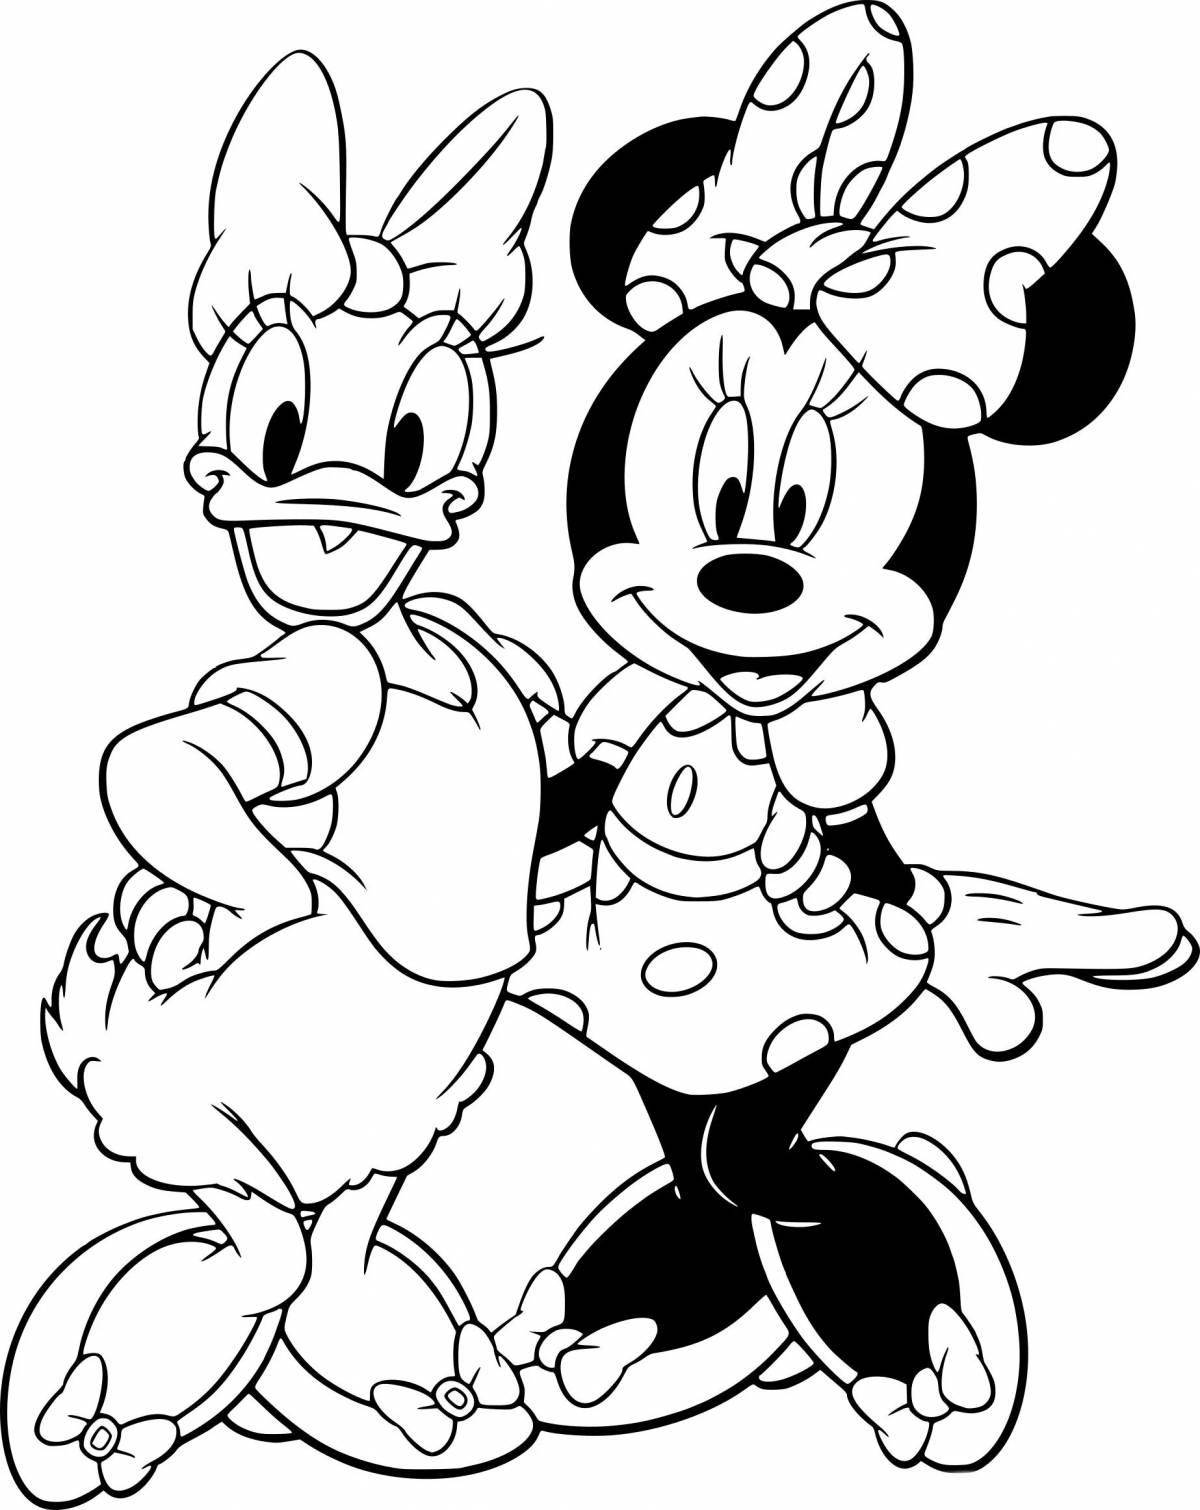 Minnie's exciting coloring book